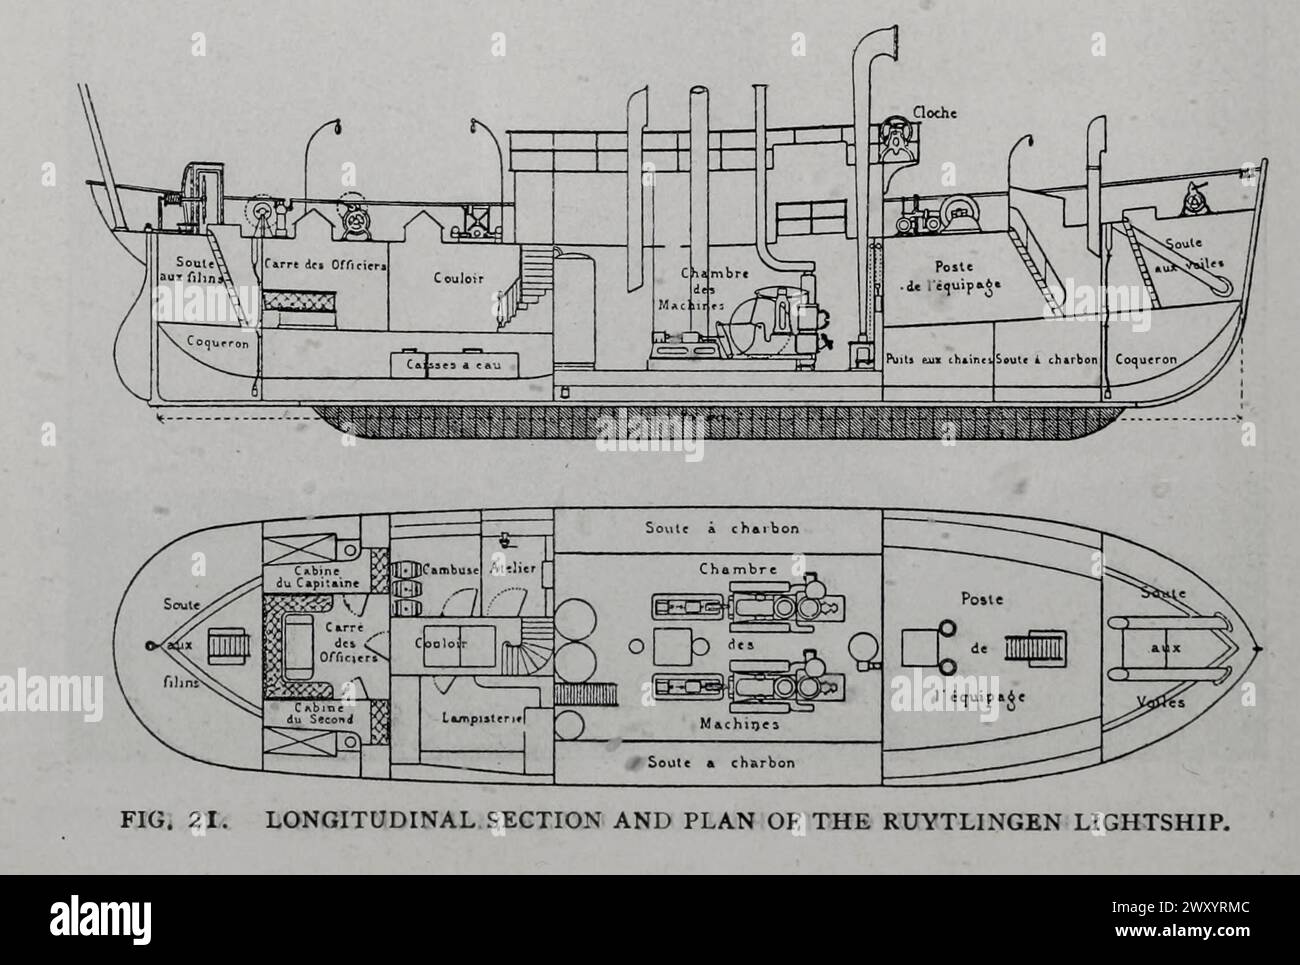 LONGITUDINAL SECTION AND PLAN OF THE RUYTLINGEN LIGHTSHIP. from the Article THE LATEST IMPROVEMENTS IN THE FRENCH LIGHTHOUSE SYSTEM. By Jacques Boyer. from The Engineering Magazine Devoted to Industrial Progress Volume XVI October 1898 - March 1899 The Engineering Magazine Co Stock Photo